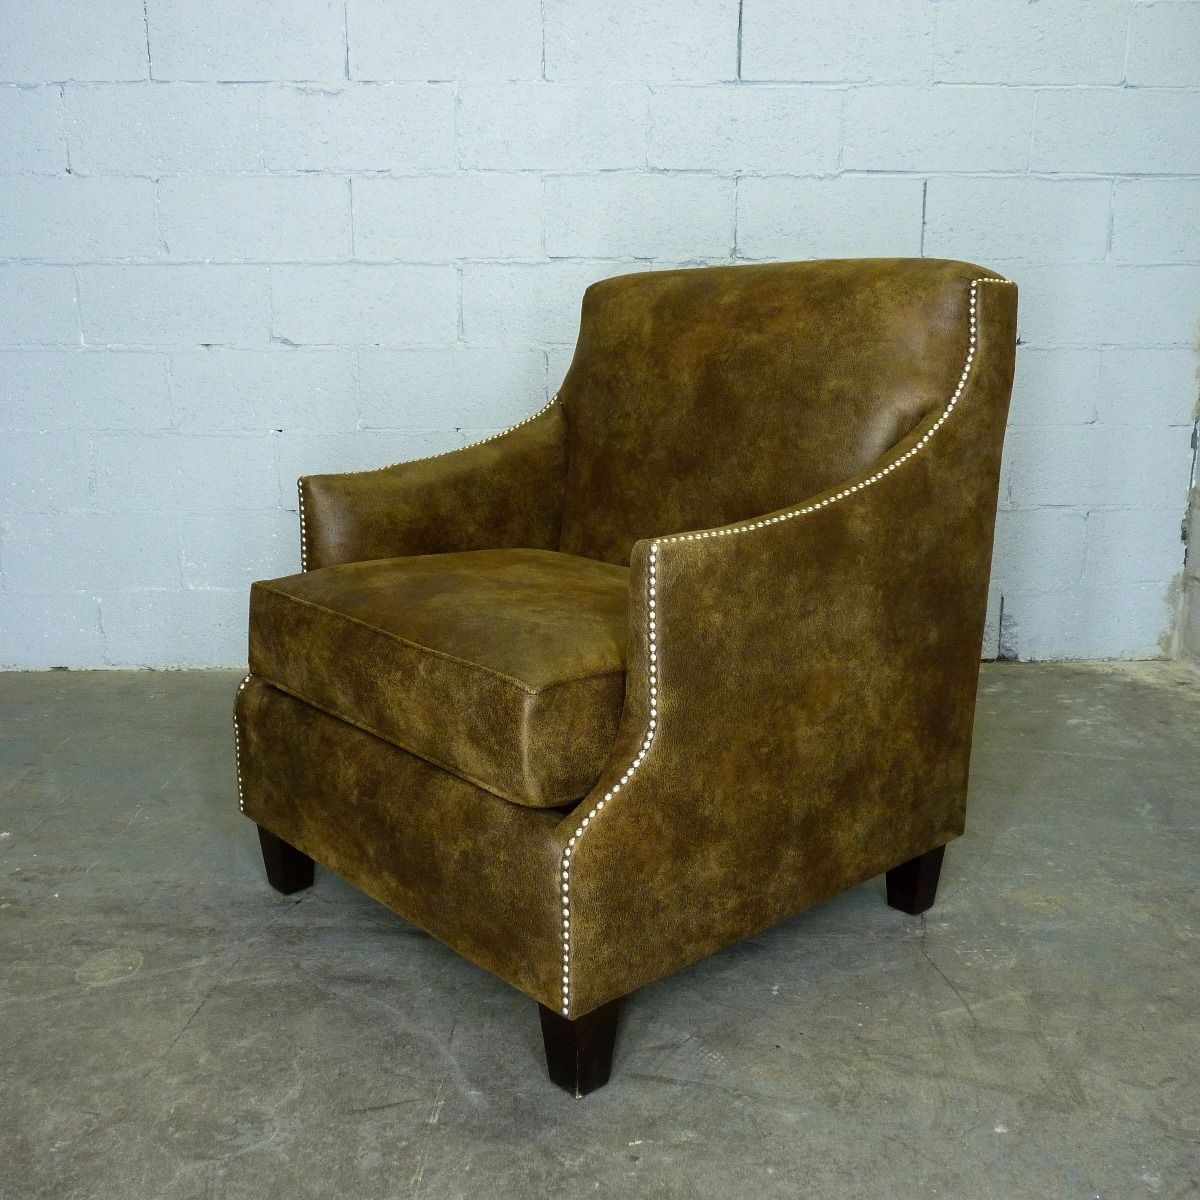 Vintage Industrial Leather Arm Chair - Nordic Side - 10-18, feed-cl0-over-80-dollars, furniture-pipeline, furniture-tag, US